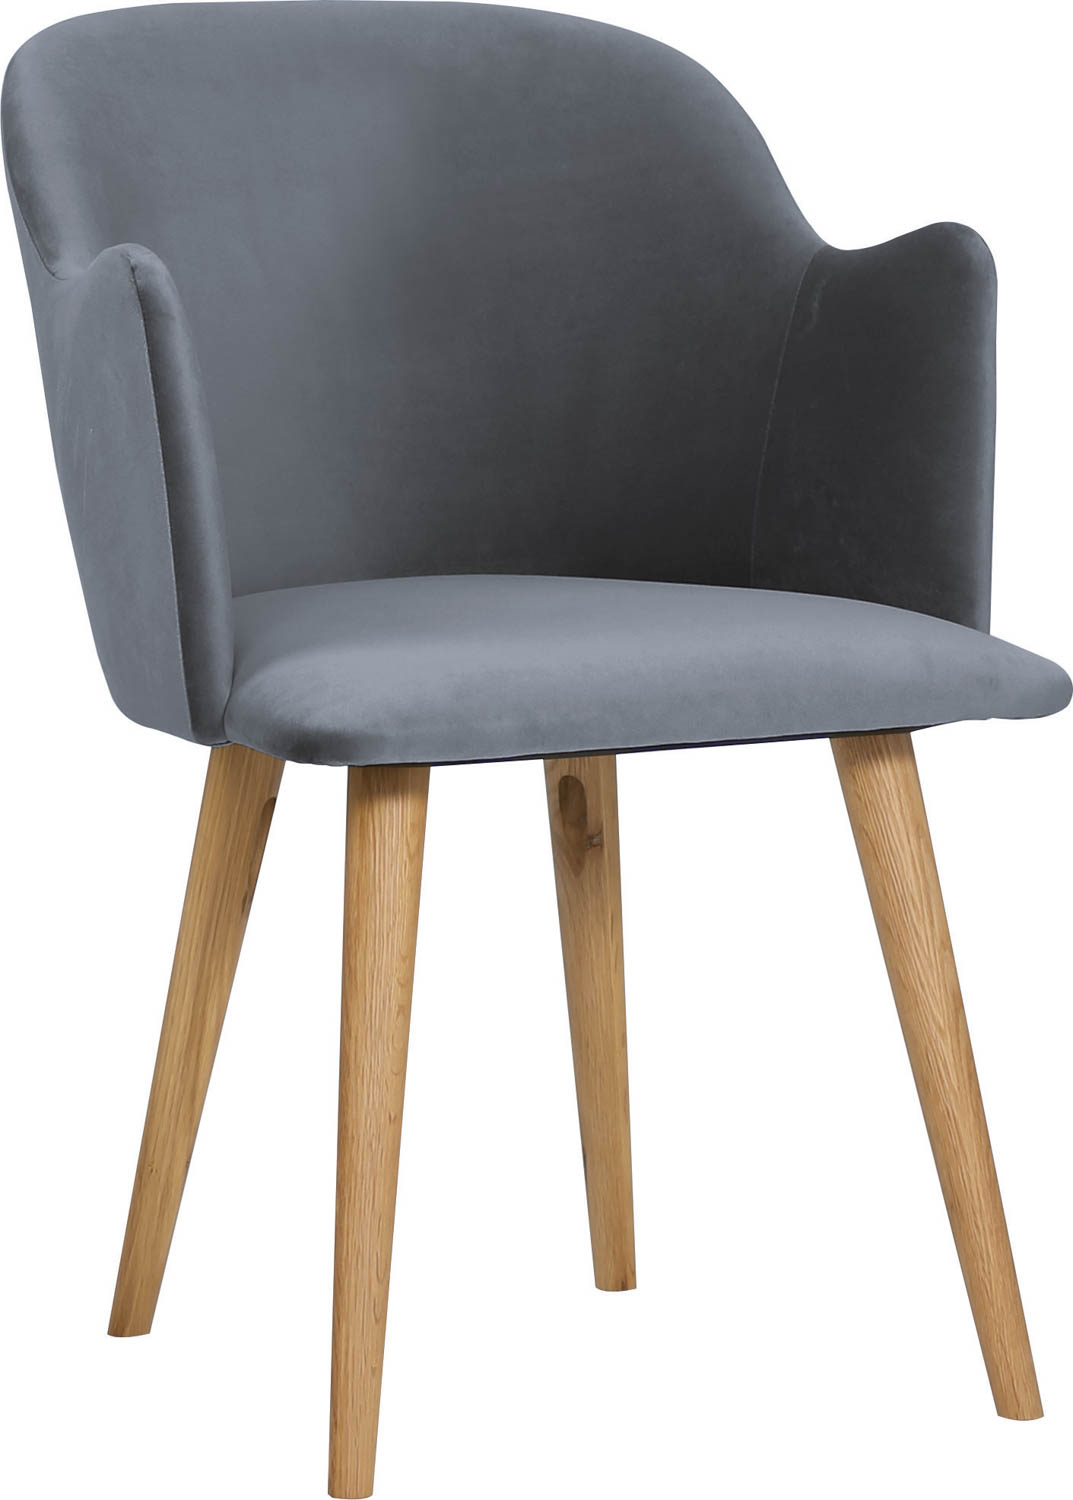 NAYE ARM CHAIR - Repro Project Furniture